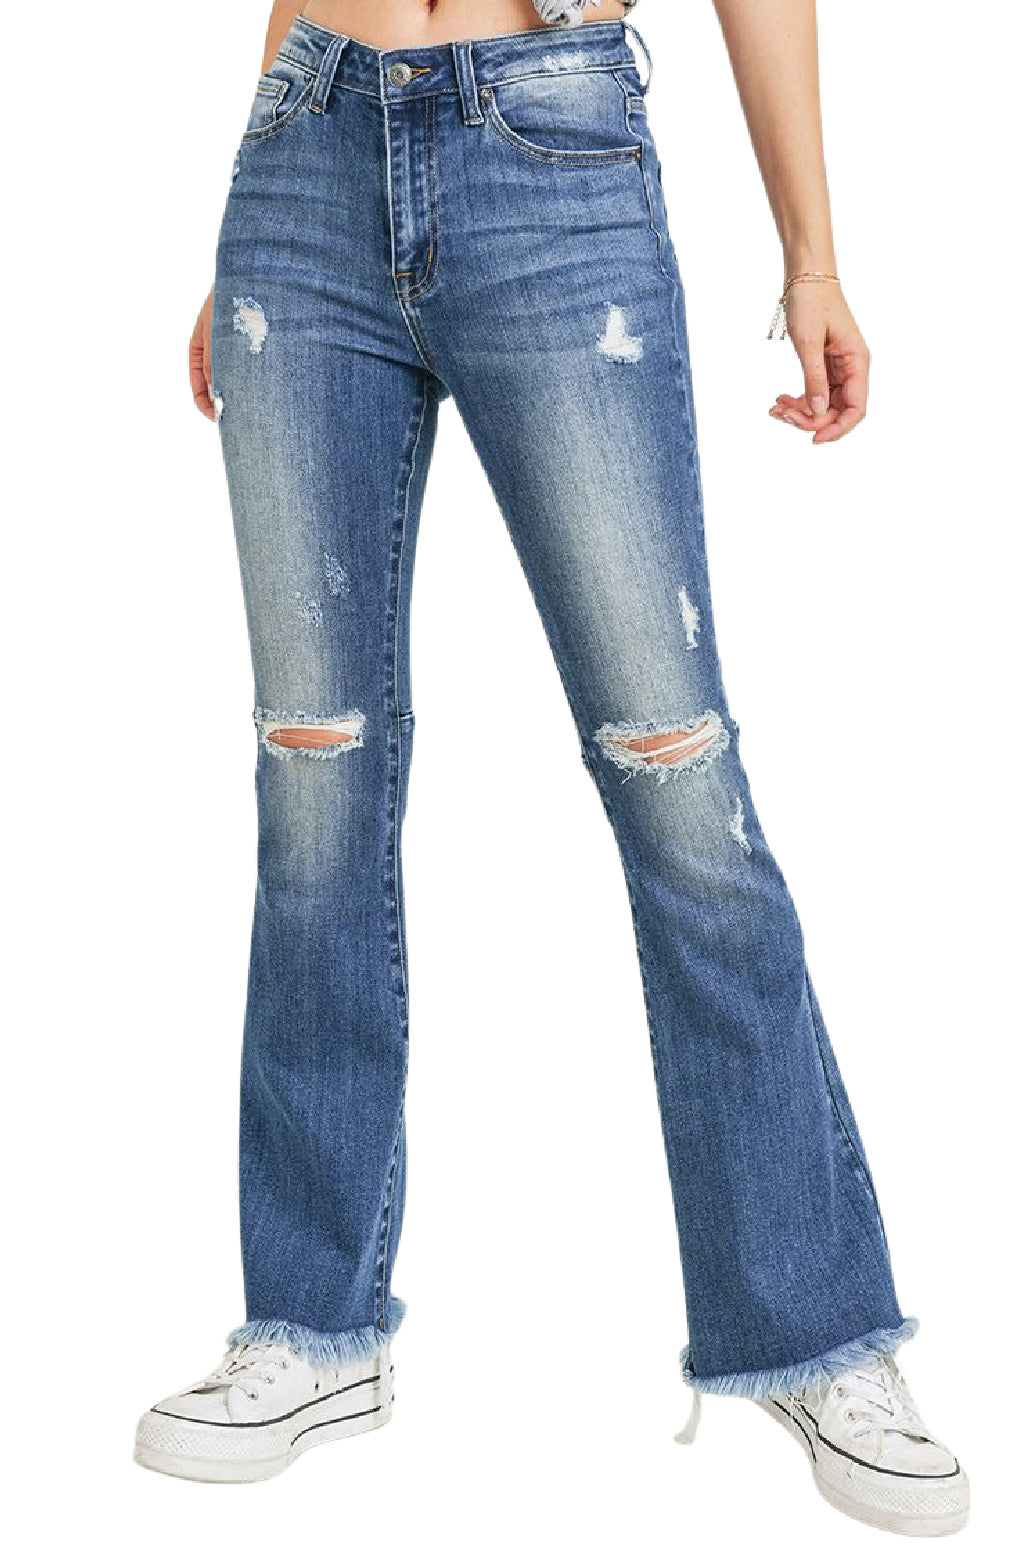 Risen Flare Distressed Knee High Rise Jeans Style RDP1295